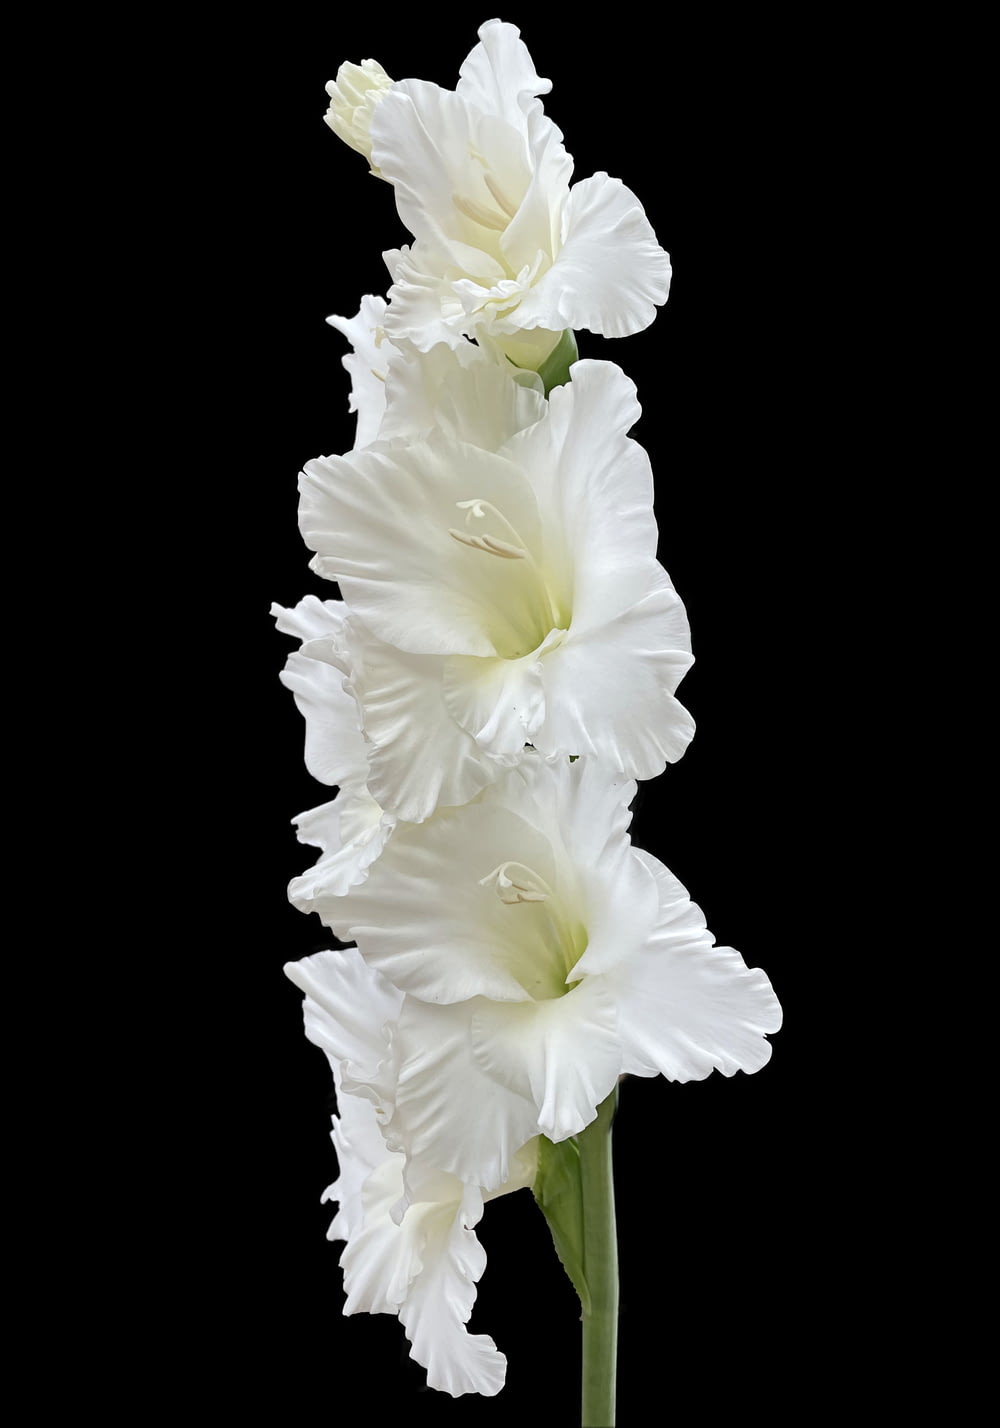 two white flowers in a vase on a black background